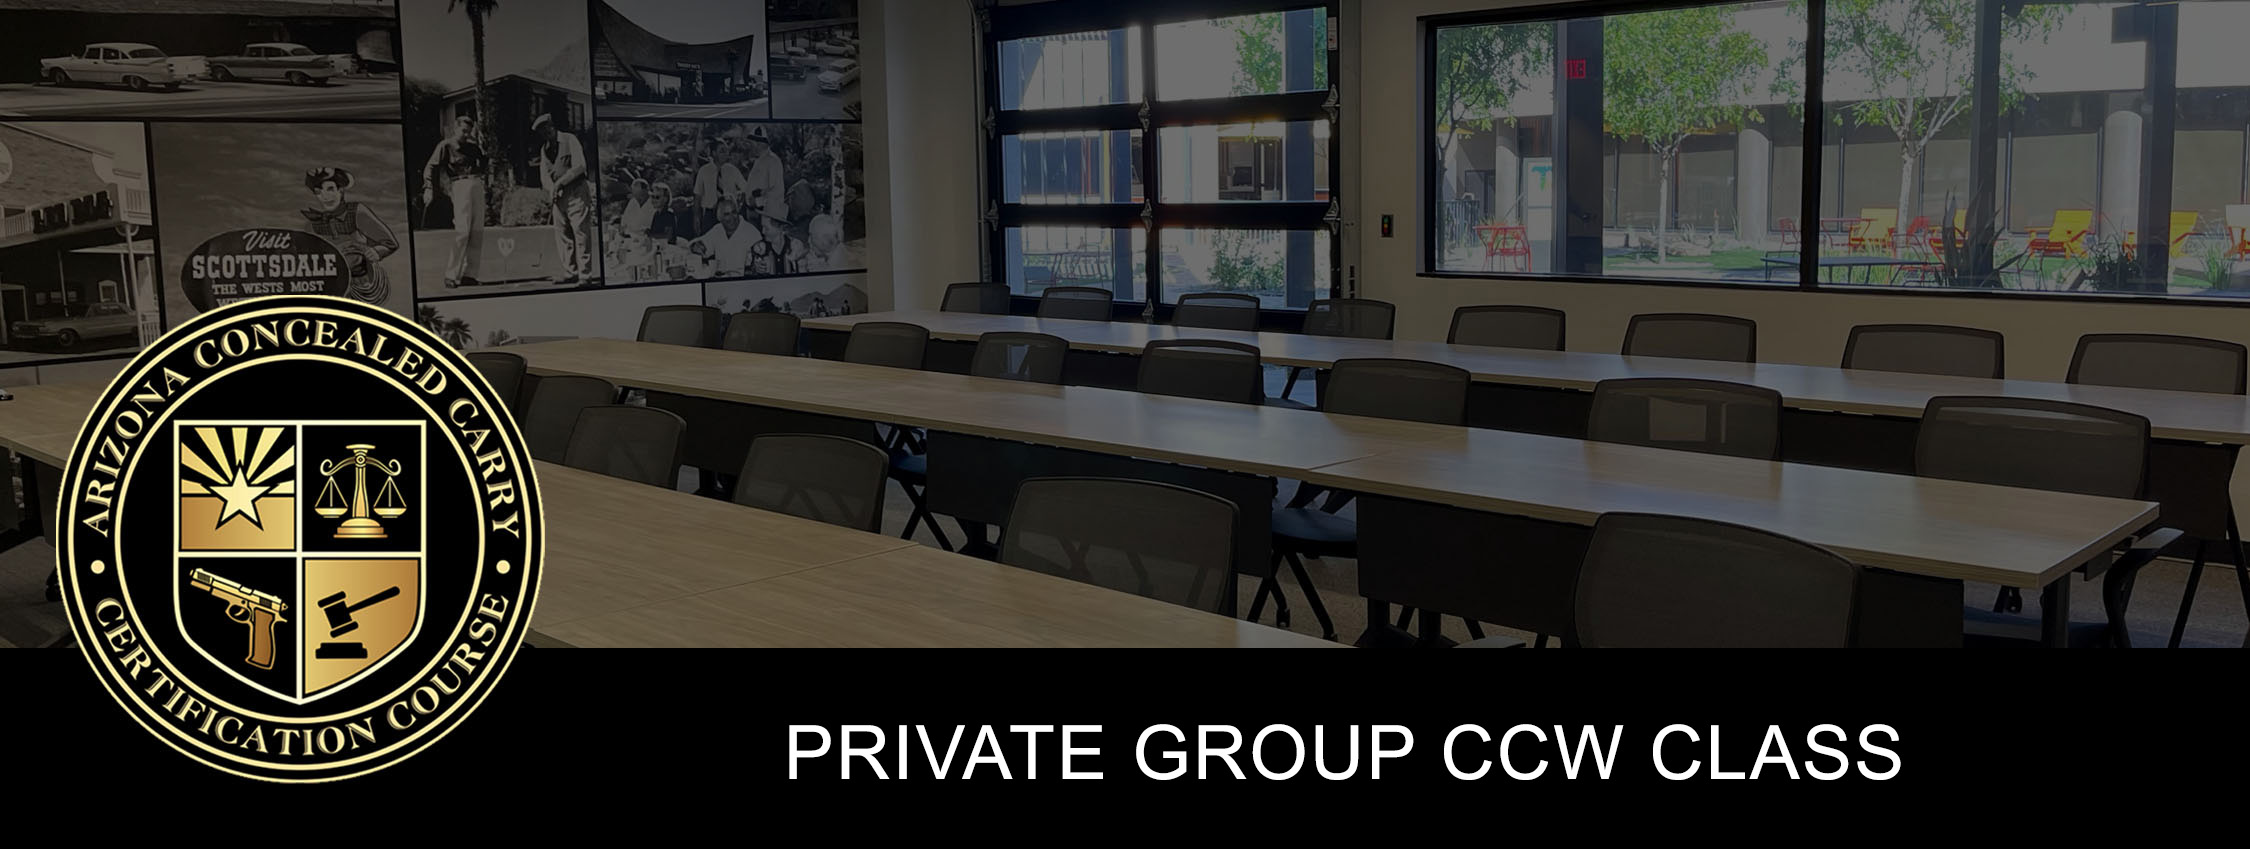 Private Group CCW Classes in Scottsdale | AZ CCW Online